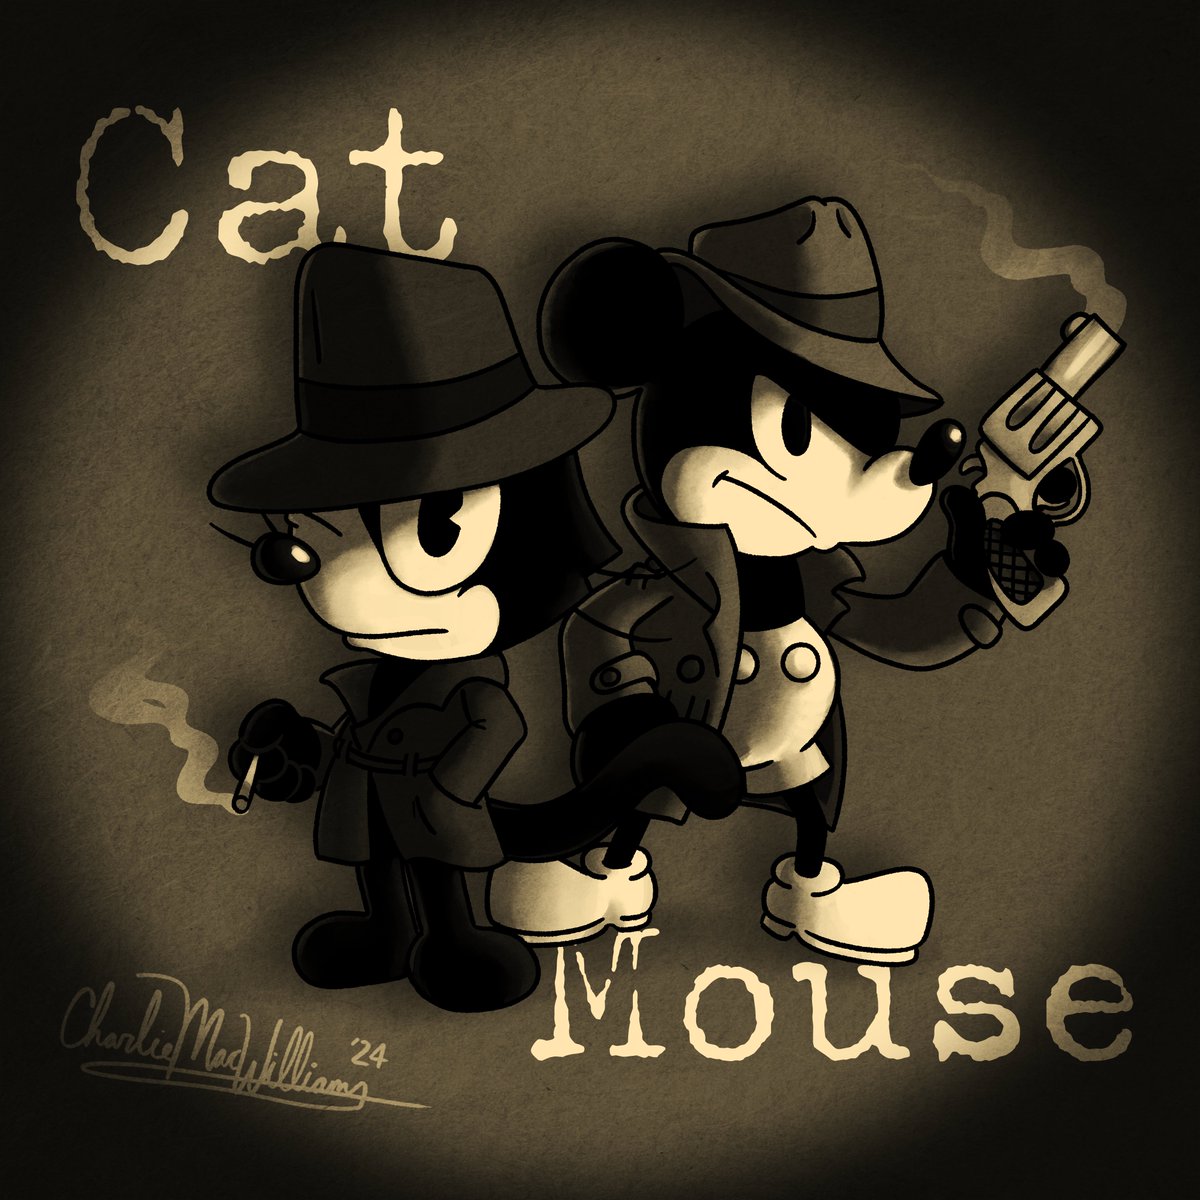 I really loved @Danny8bit 's idea of 'Cat & Mouse' and just had to draw a take on it! 🐱🐭 #FelixTheCat #MickeyMouse